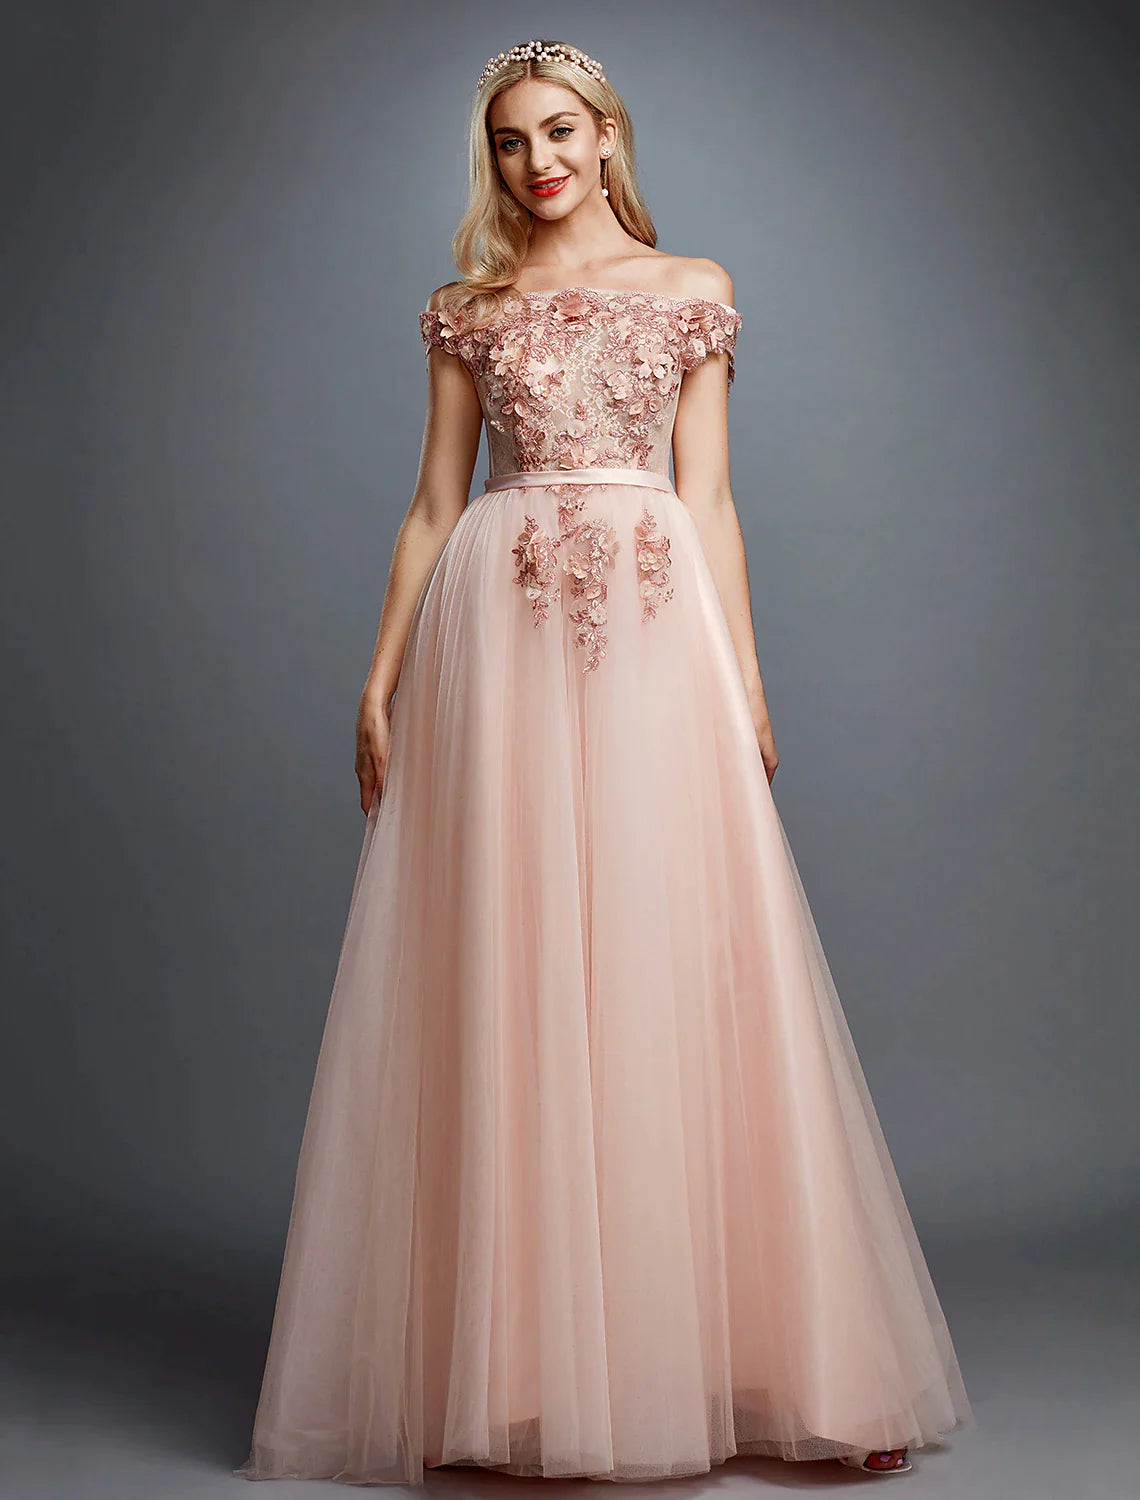 A-Line Floral Prom Dress Wedding Sleeveless Off Shoulder Tulle Over Lace with Appliques